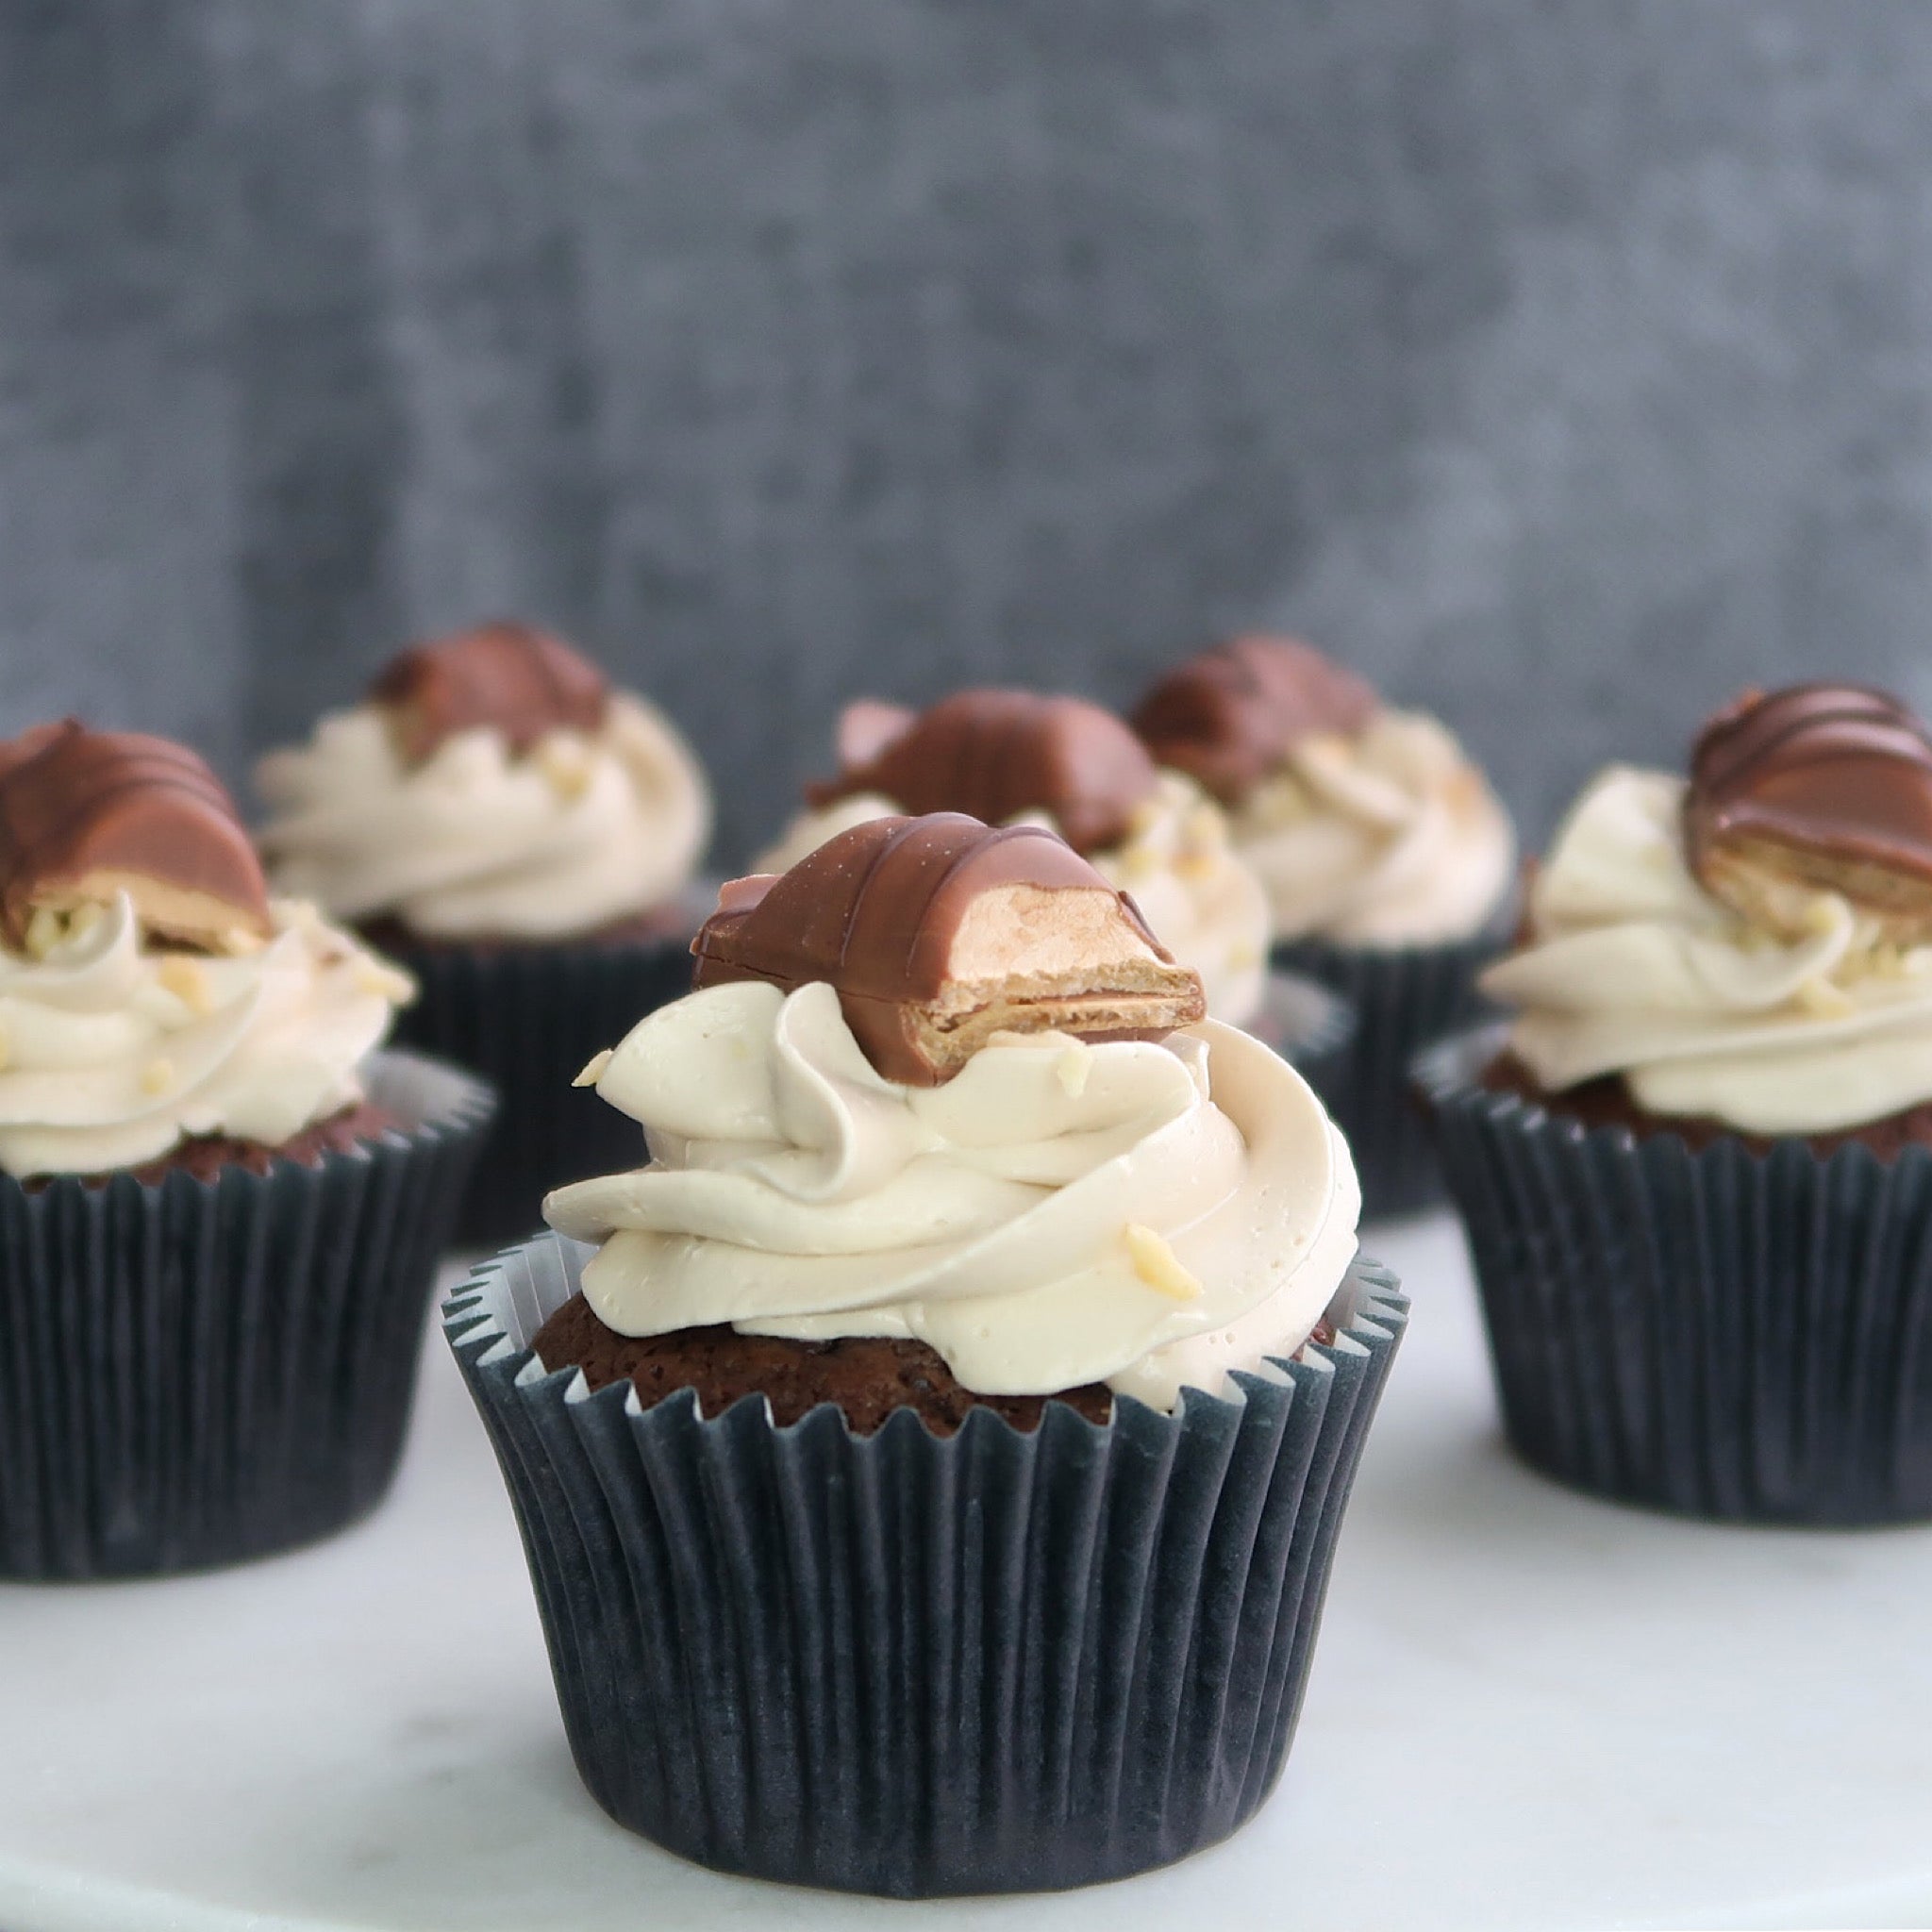 Kinder Bueno Cupcakes, Online Bakery